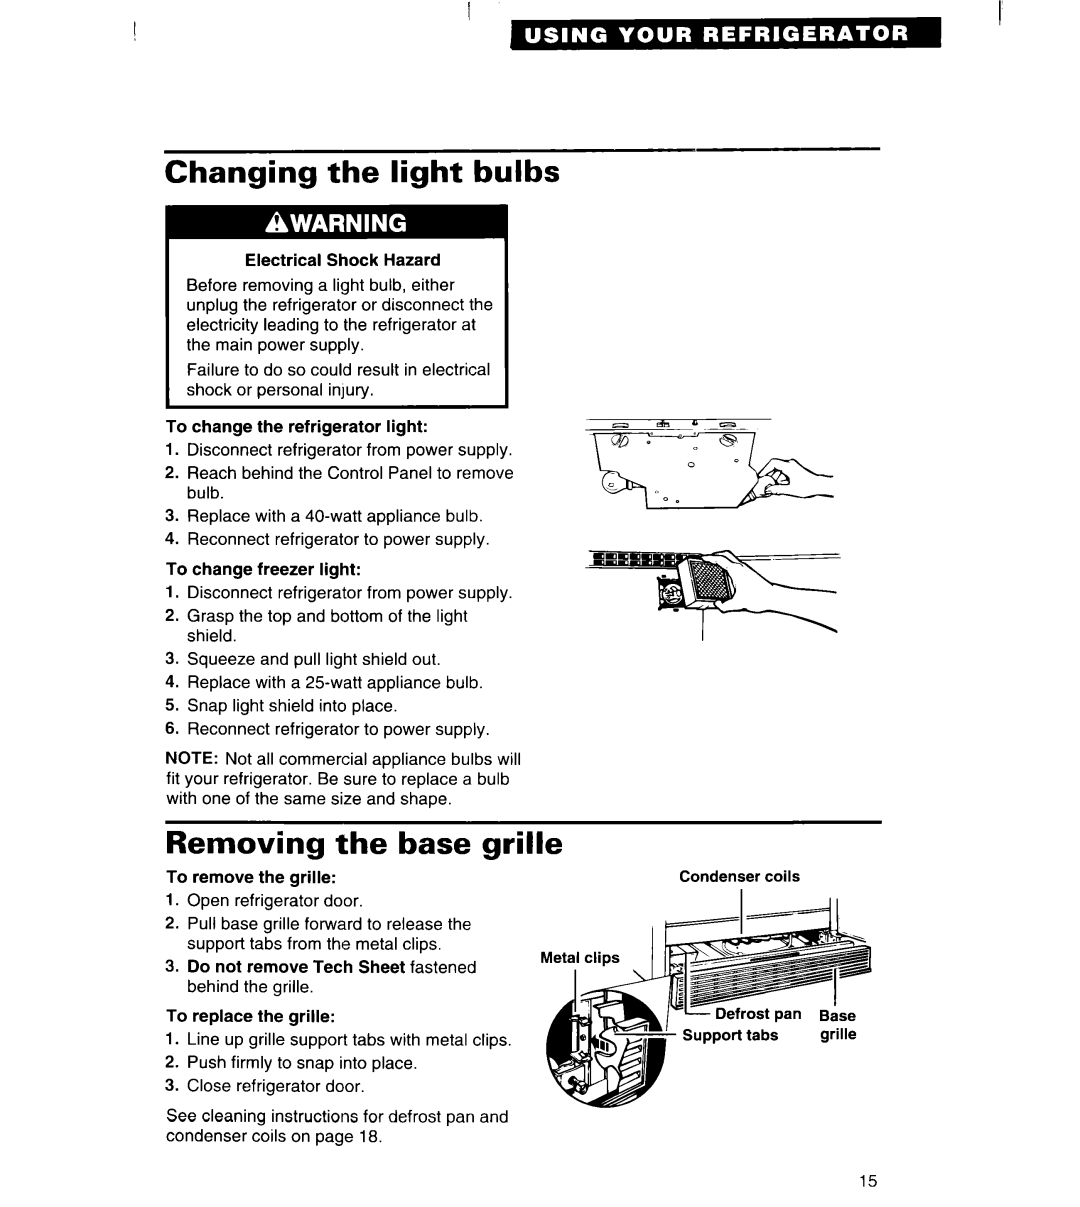 Whirlpool ET25DK important safety instructions Changing the light bulbs, Removing the base grille 